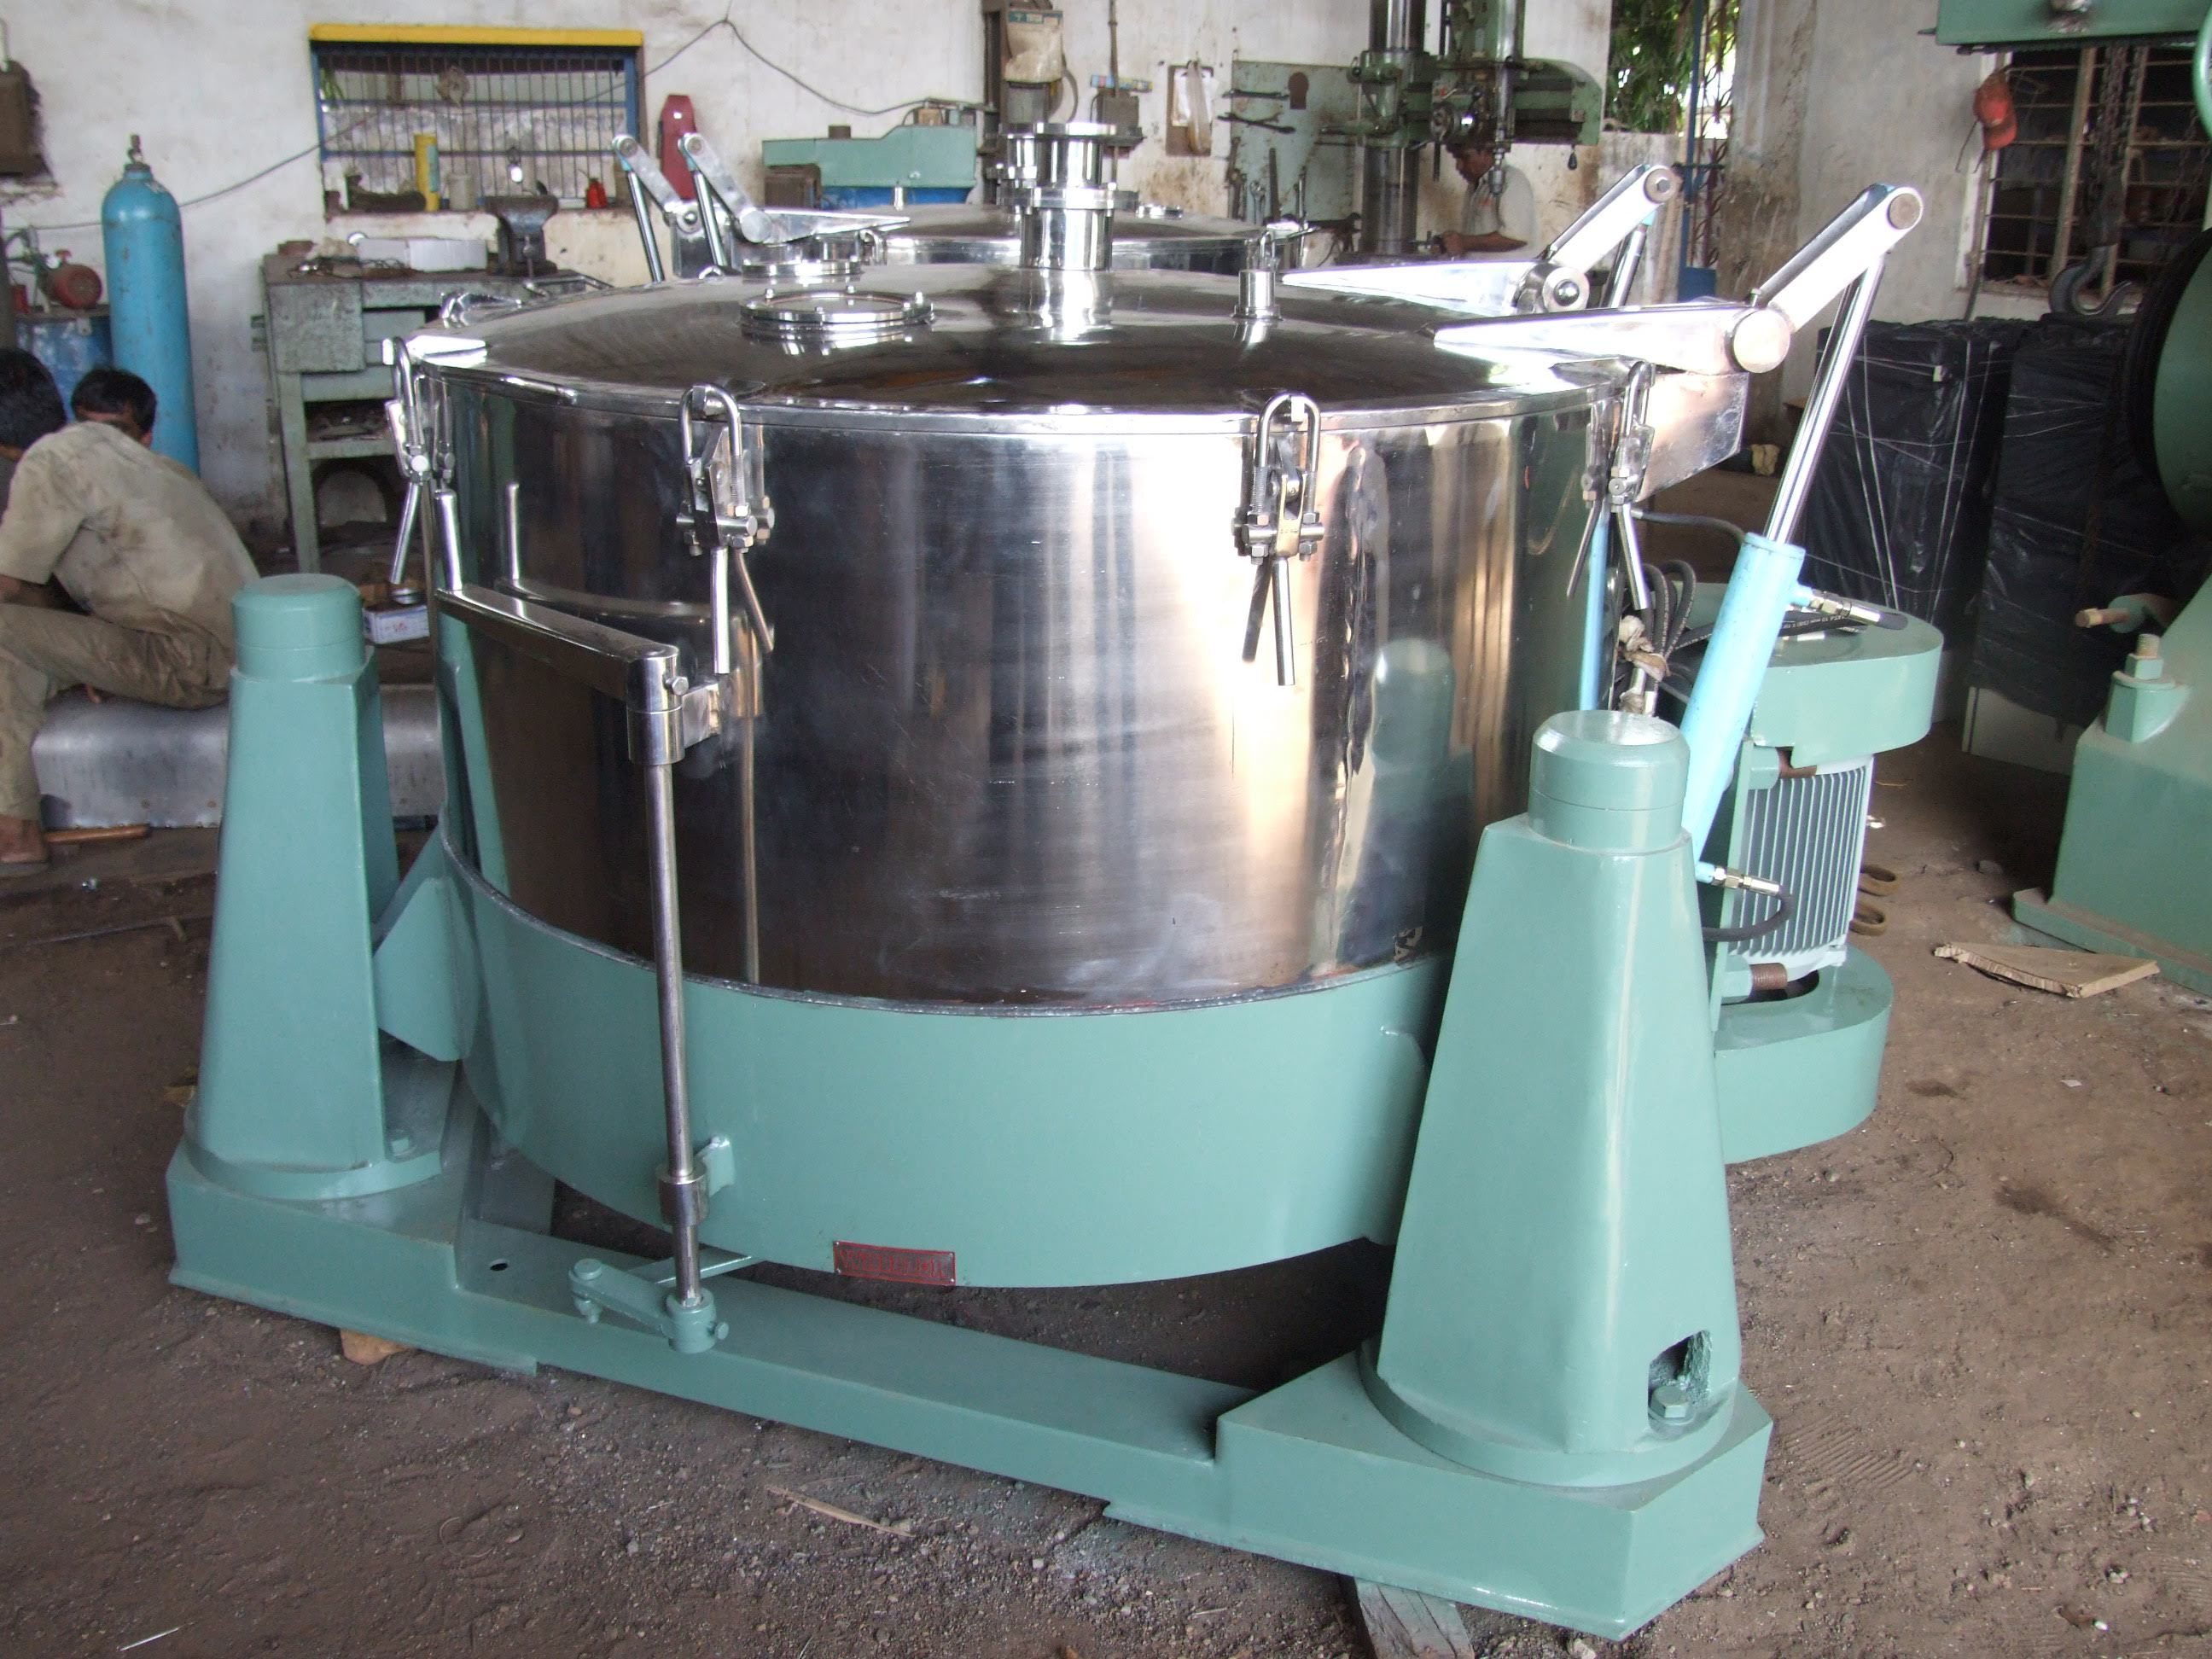 Three Point Suspended Centrifuge